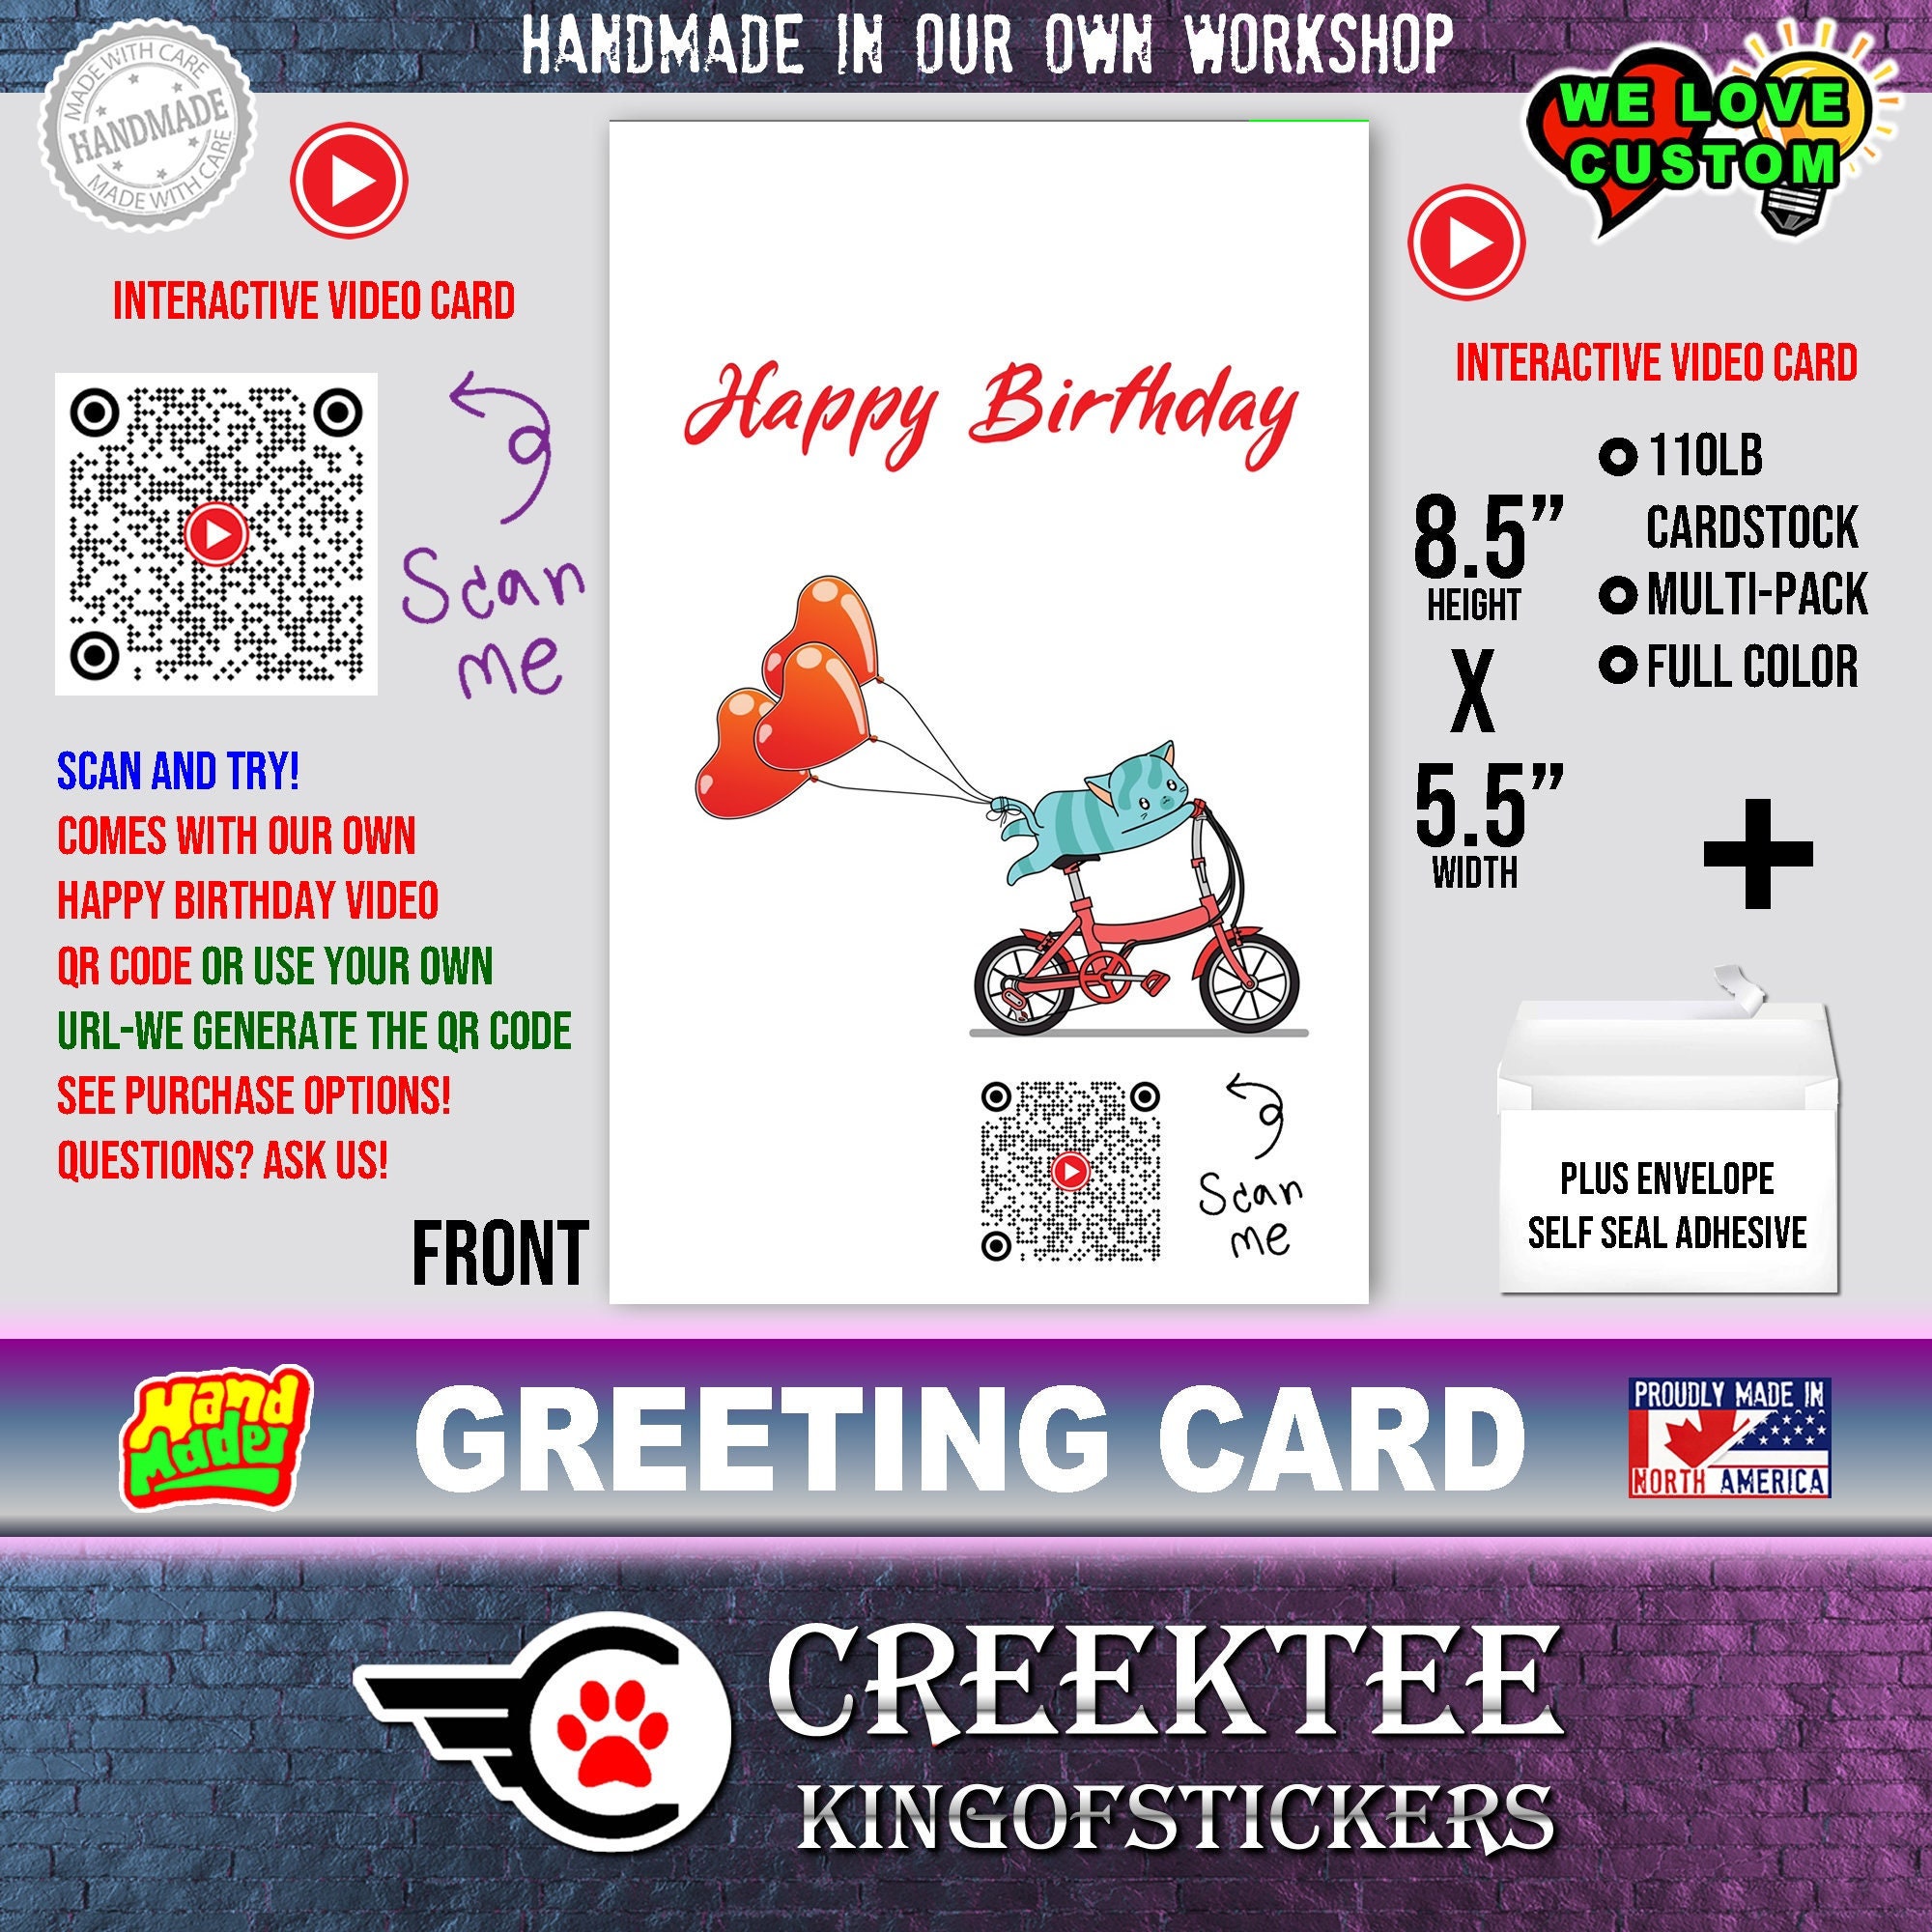 Happy Birthday Video Greeting Card 8.5 inch high x 5.5 inch wide 110lb cardstock hand made full color print. Customizable.